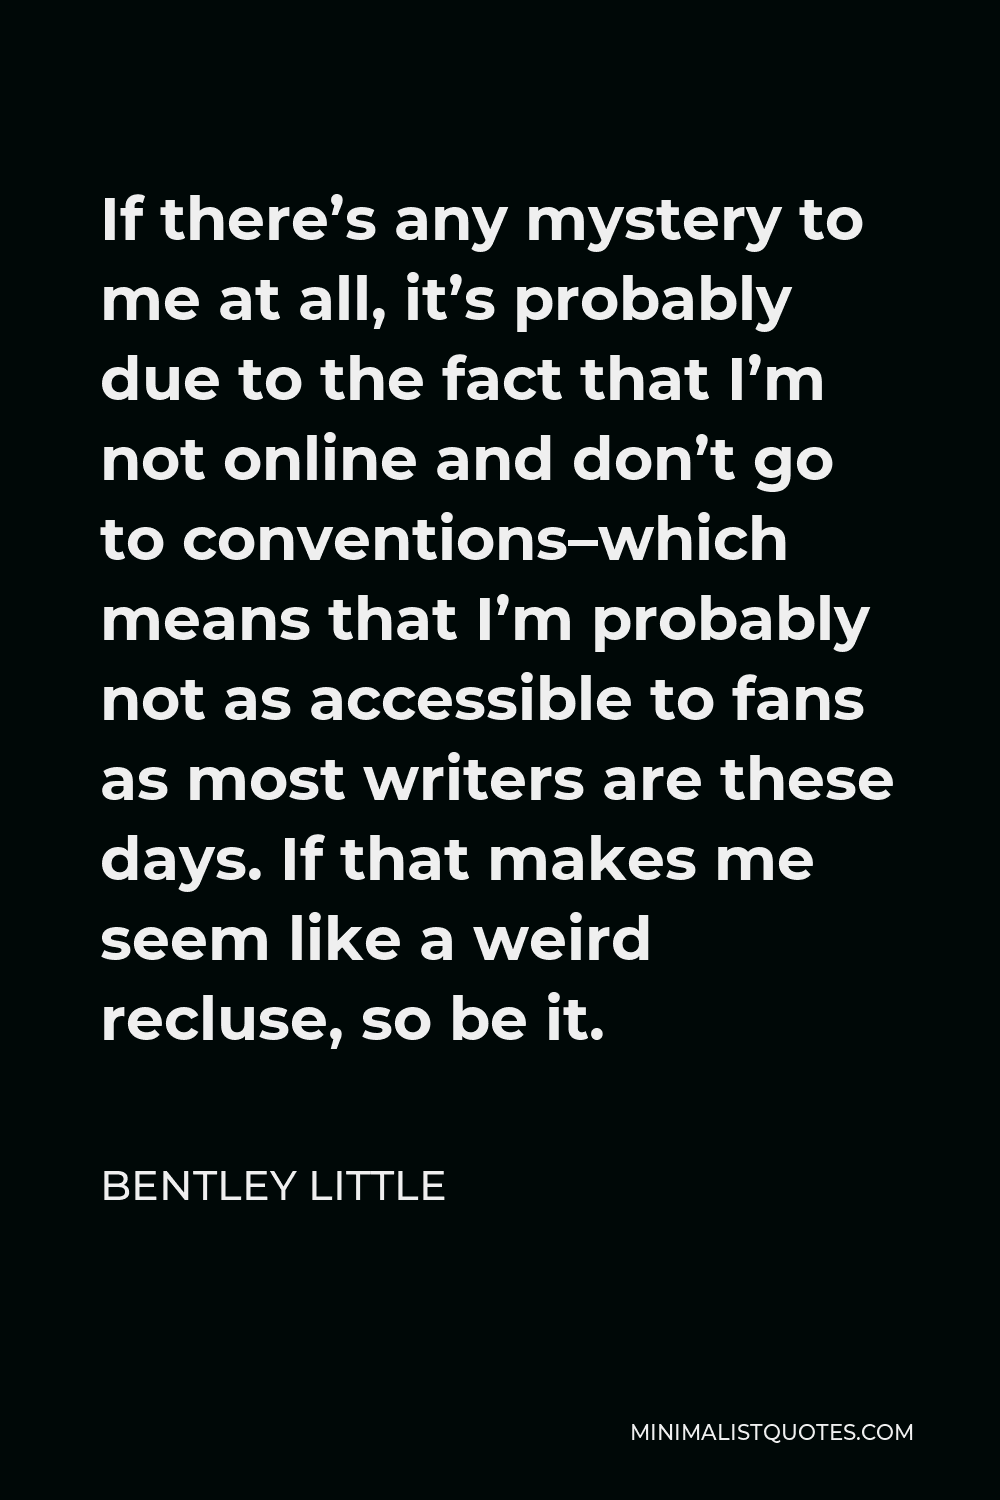 Bentley Little Quote - If there’s any mystery to me at all, it’s probably due to the fact that I’m not online and don’t go to conventions–which means that I’m probably not as accessible to fans as most writers are these days. If that makes me seem like a weird recluse, so be it.